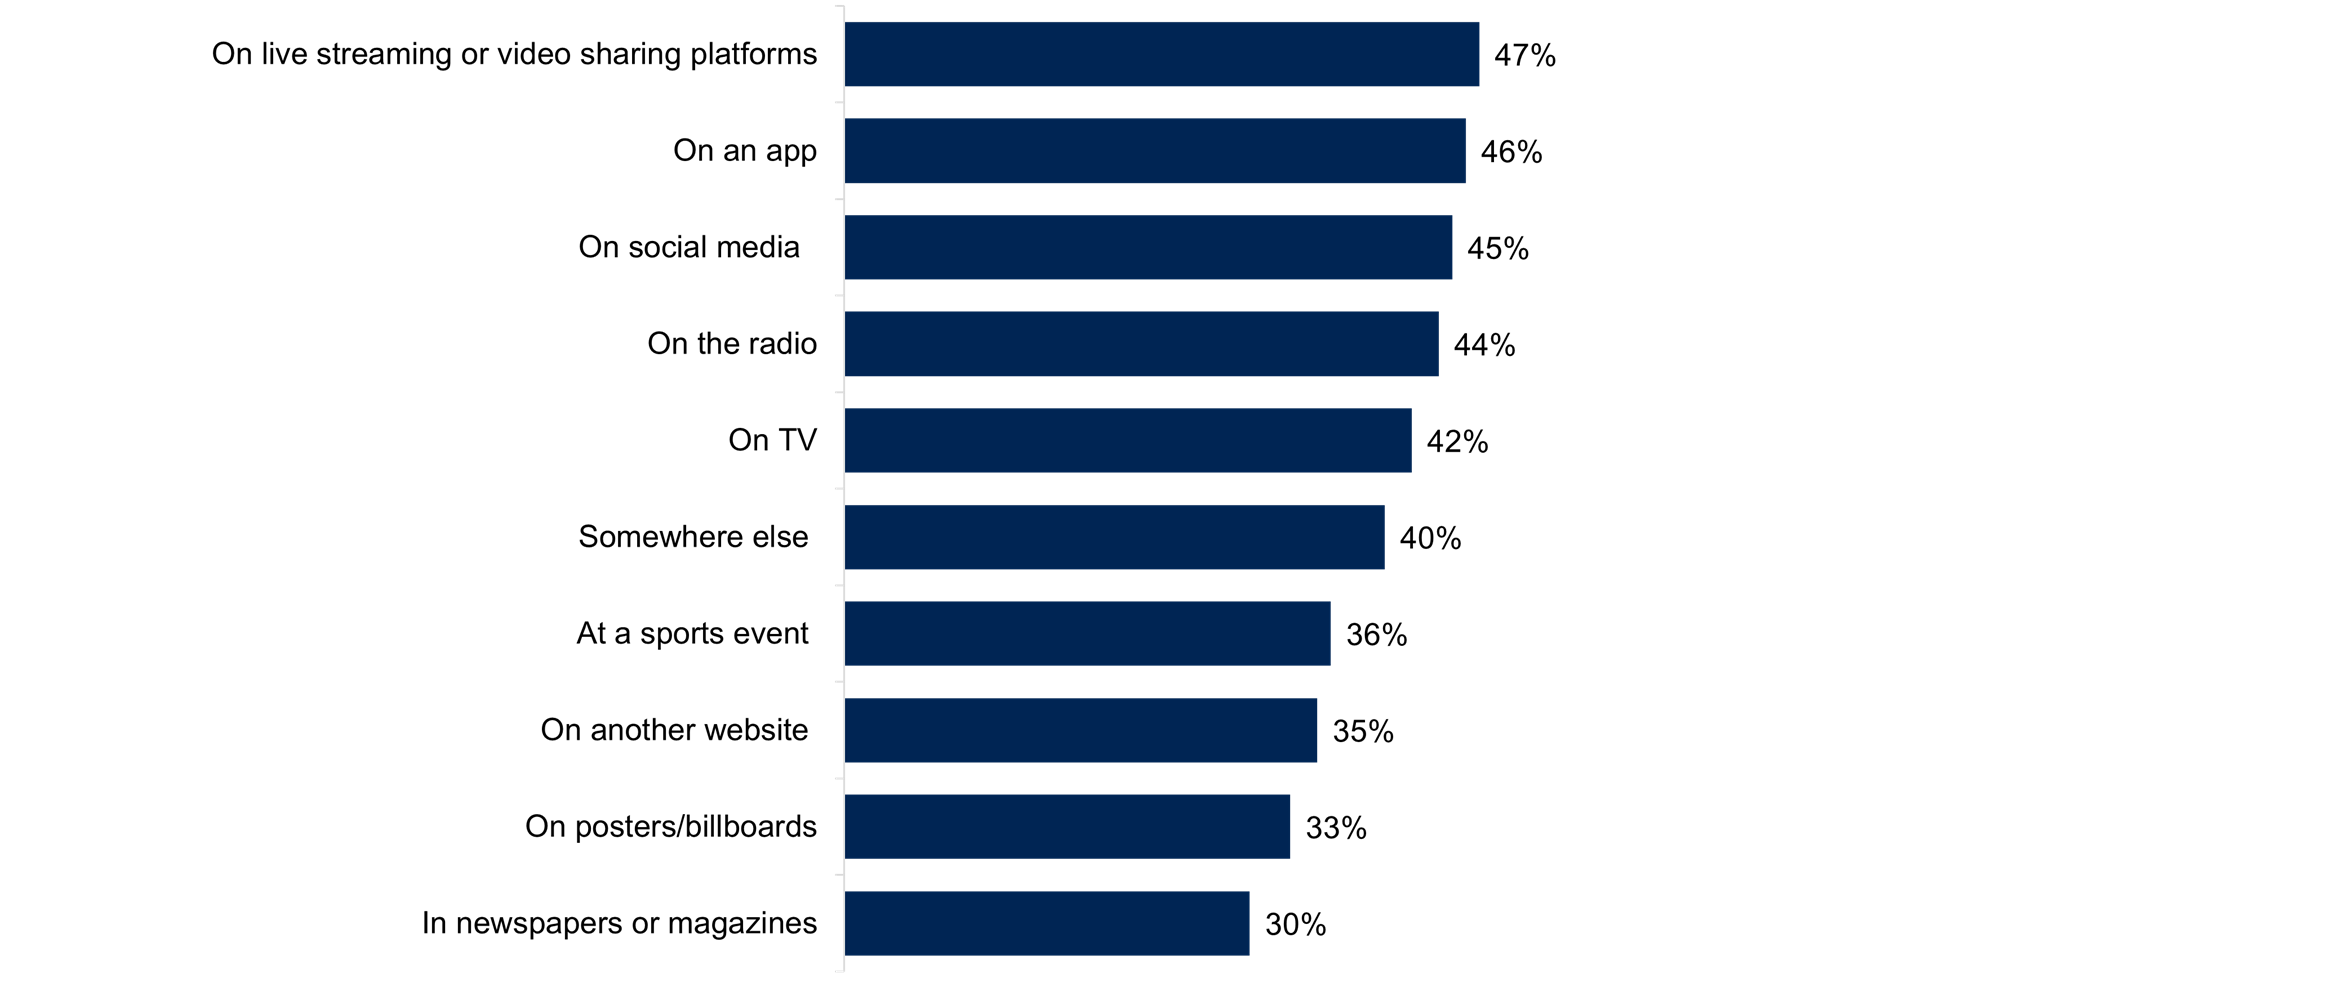 A bar chart showing where, from 'In newspapers or magazines' to 'On live streaming or video sharing platforms', young people are seeing and/or hearing gambling promotions and/or adverts at least once a week from the last 12 months. Data from the chart is provided within the following table.